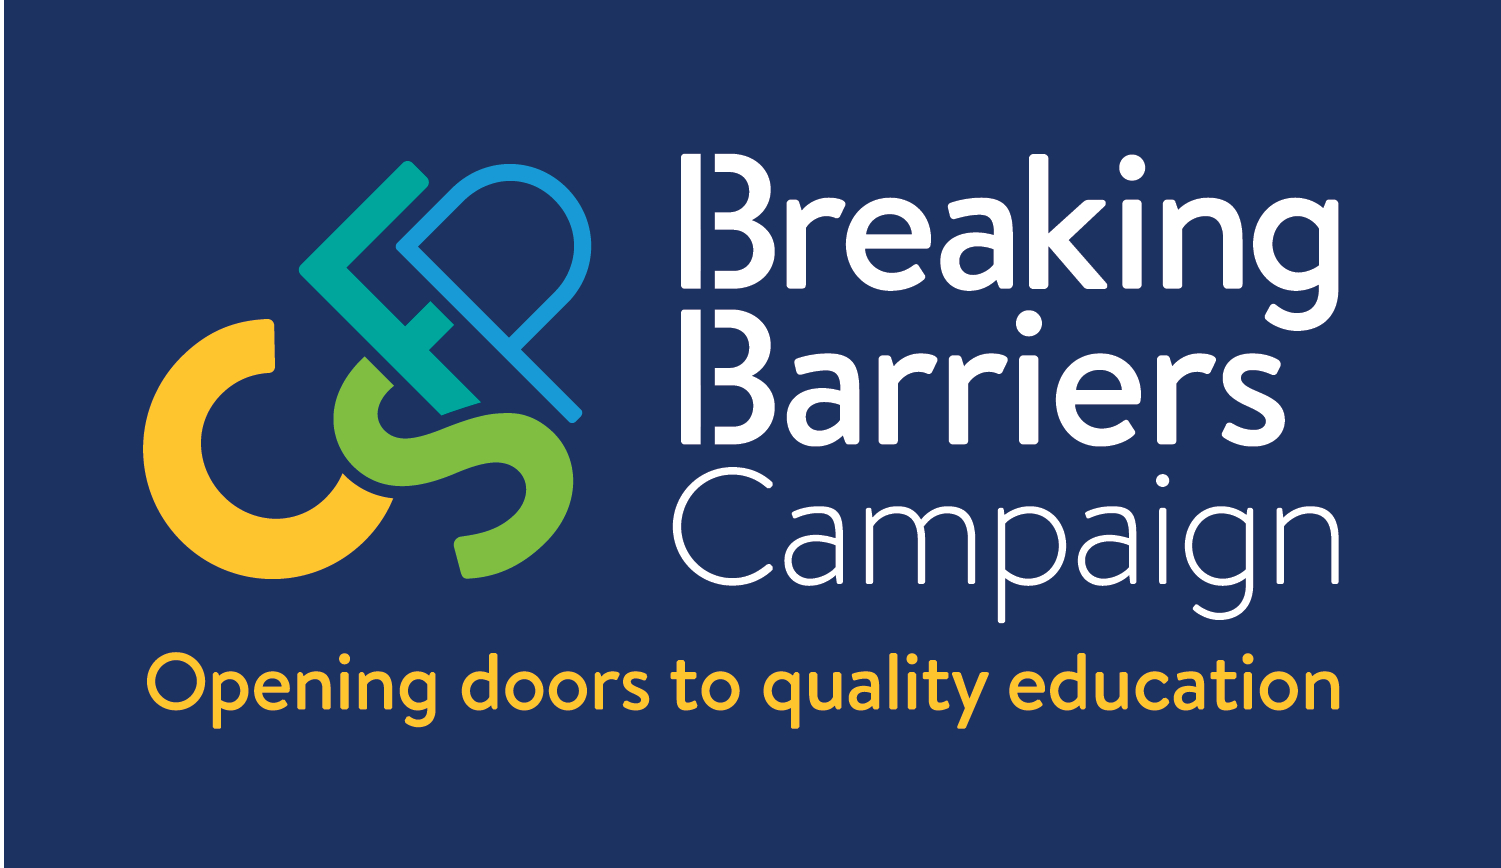 CSFP's Breaking Barriers Campaign - Children's Scholarship Fund